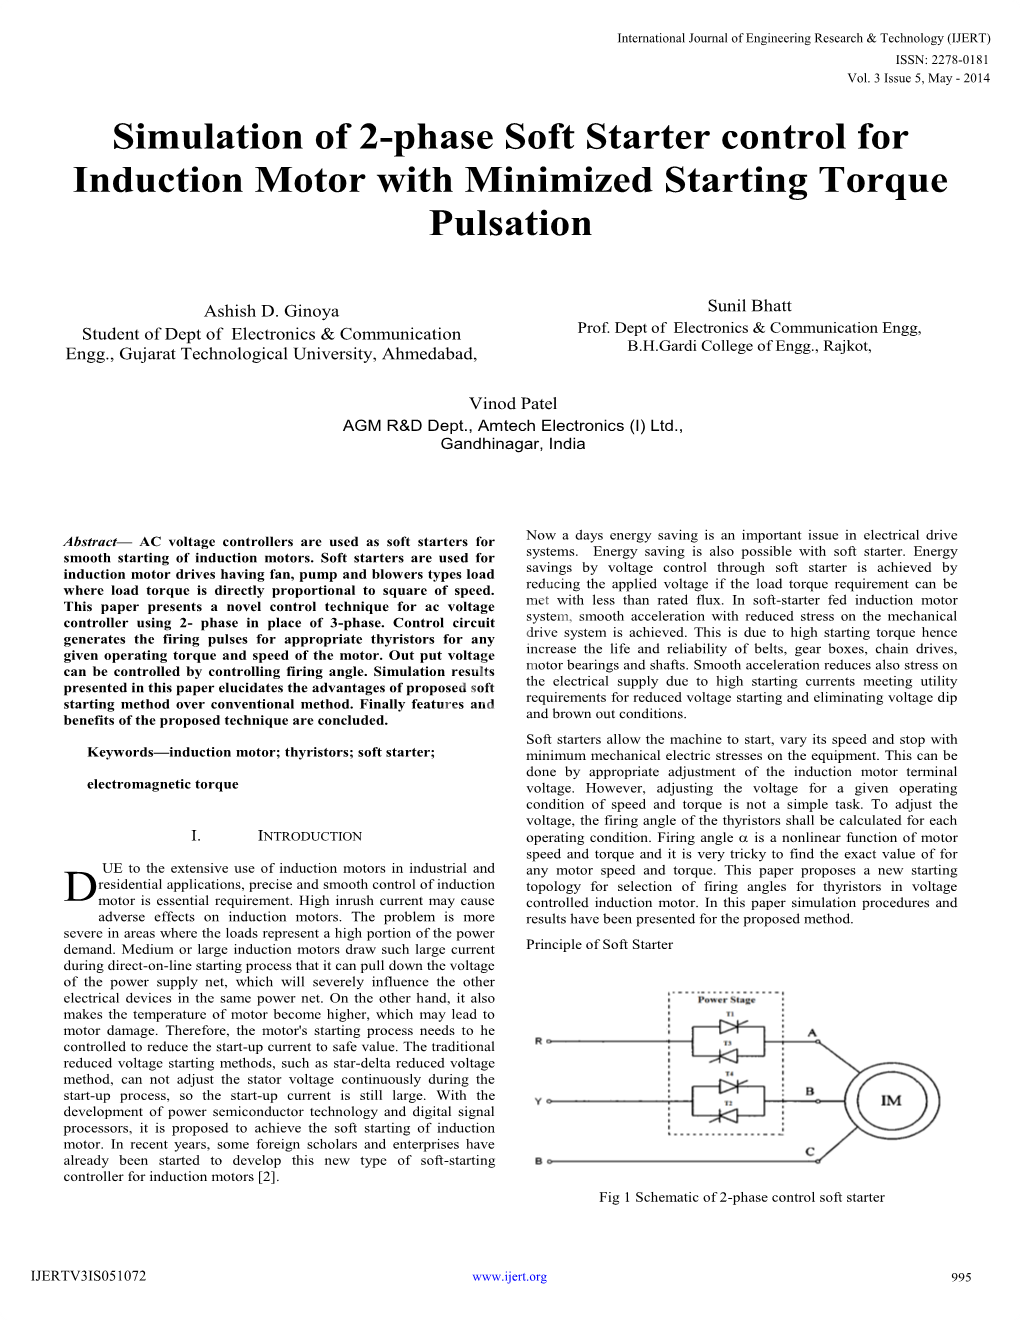 Simulation of 2-Phase Soft Starter Control for Induction Motor with Minimized Starting Torque